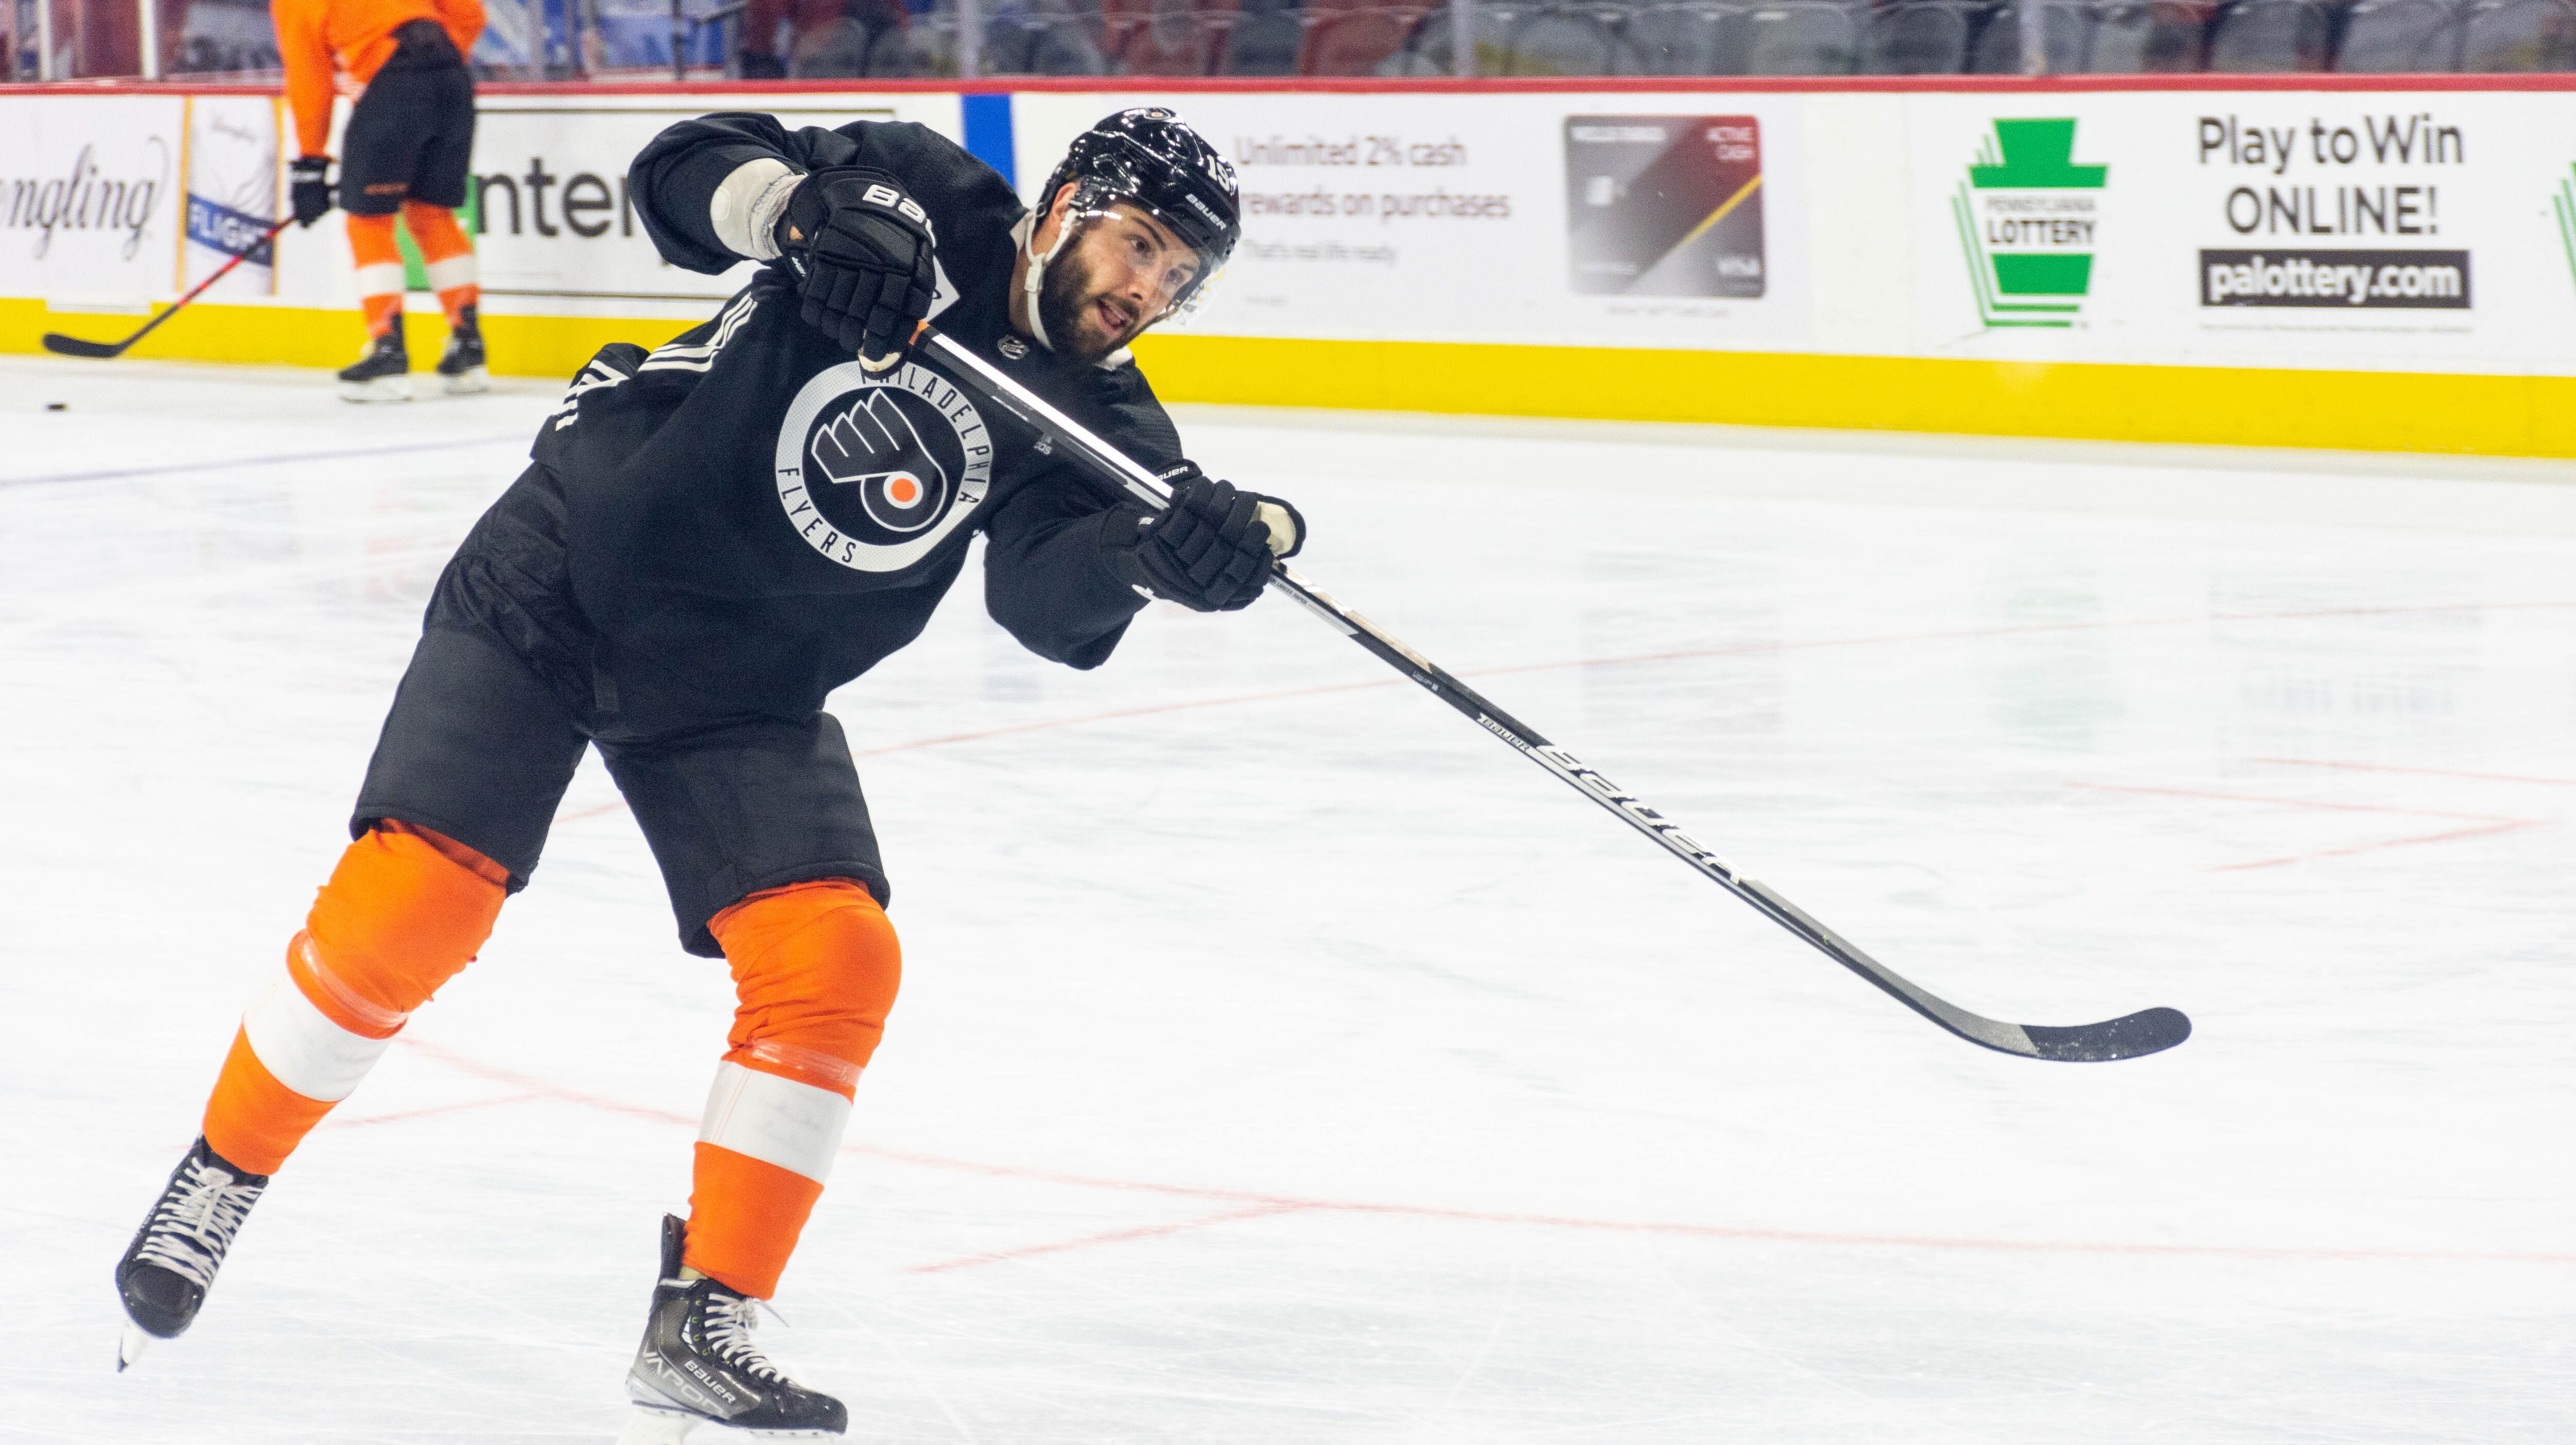 Will Tyson Foerster make the Flyers? Ian Laperriere thinks so - PHLY Sports